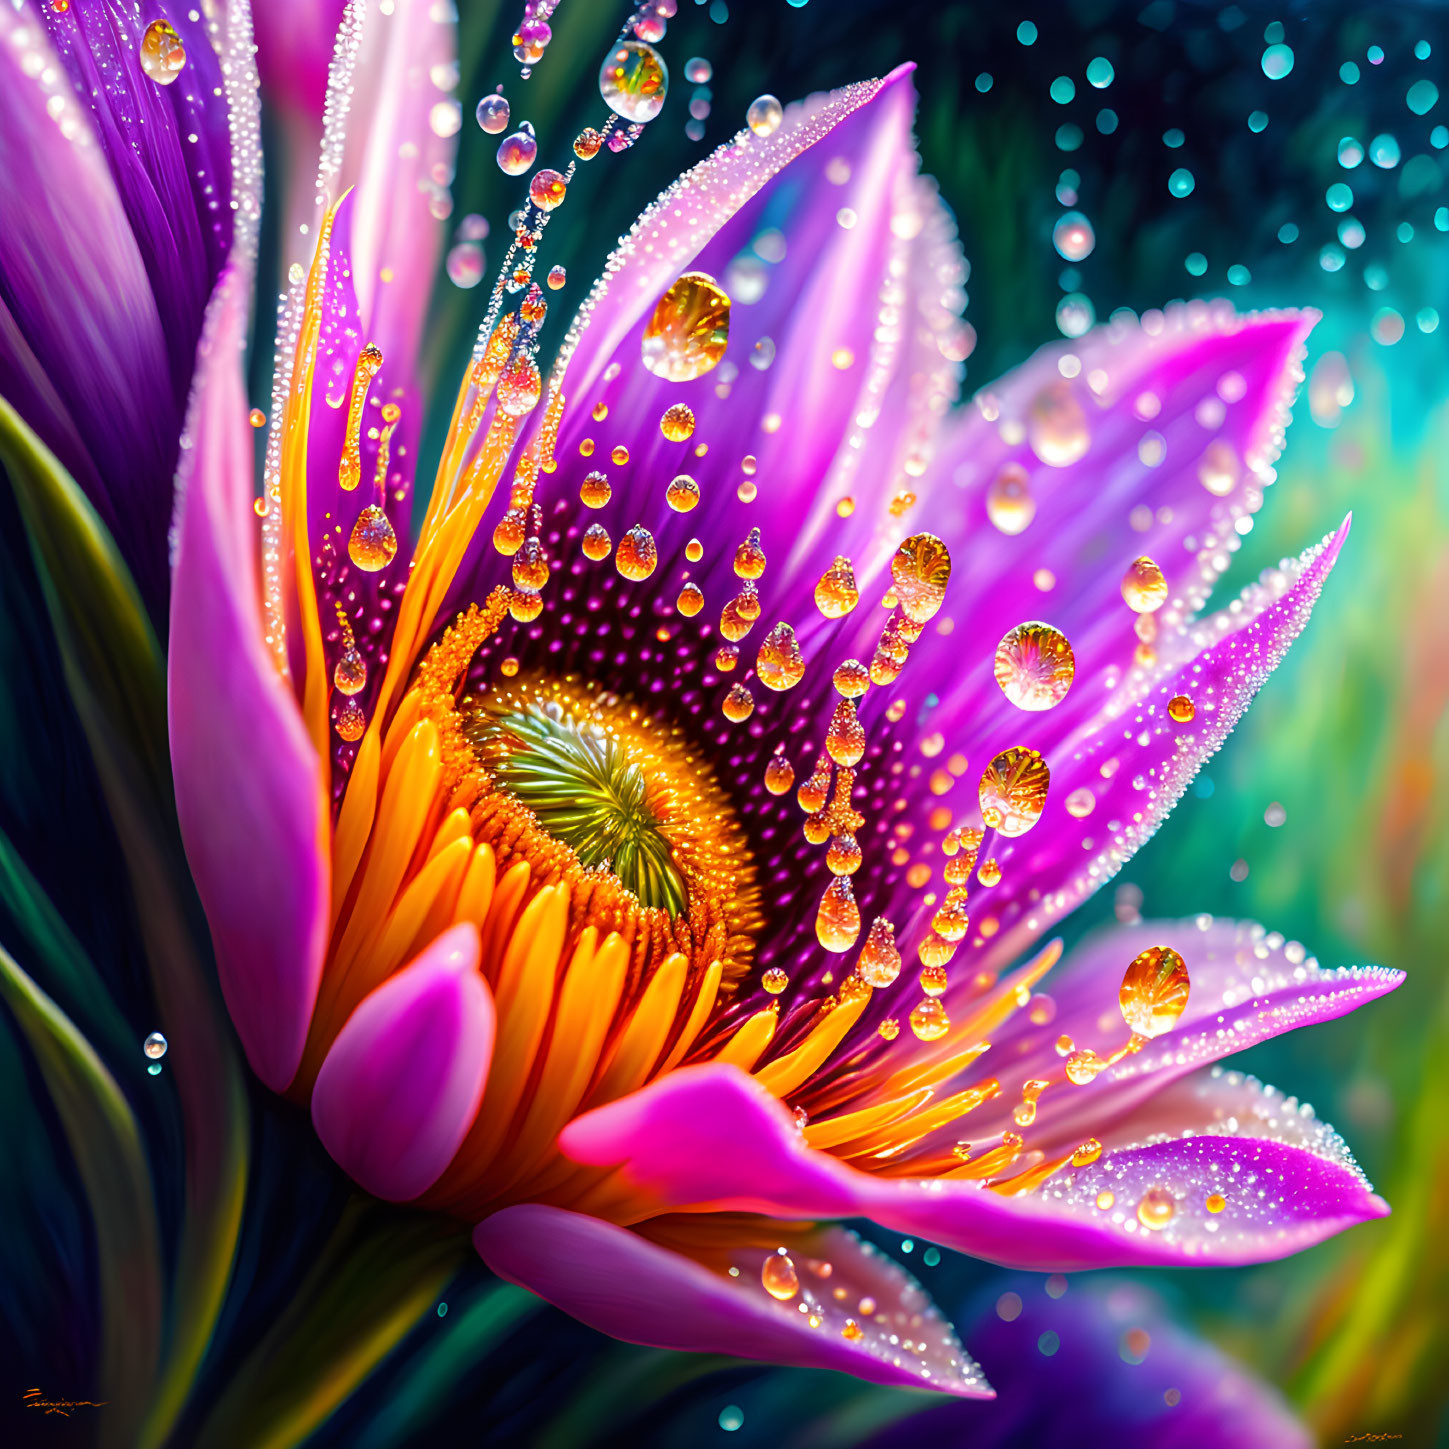 Colorful digital artwork: Dew-covered flower with luminous water droplets and intricate spiral pattern.